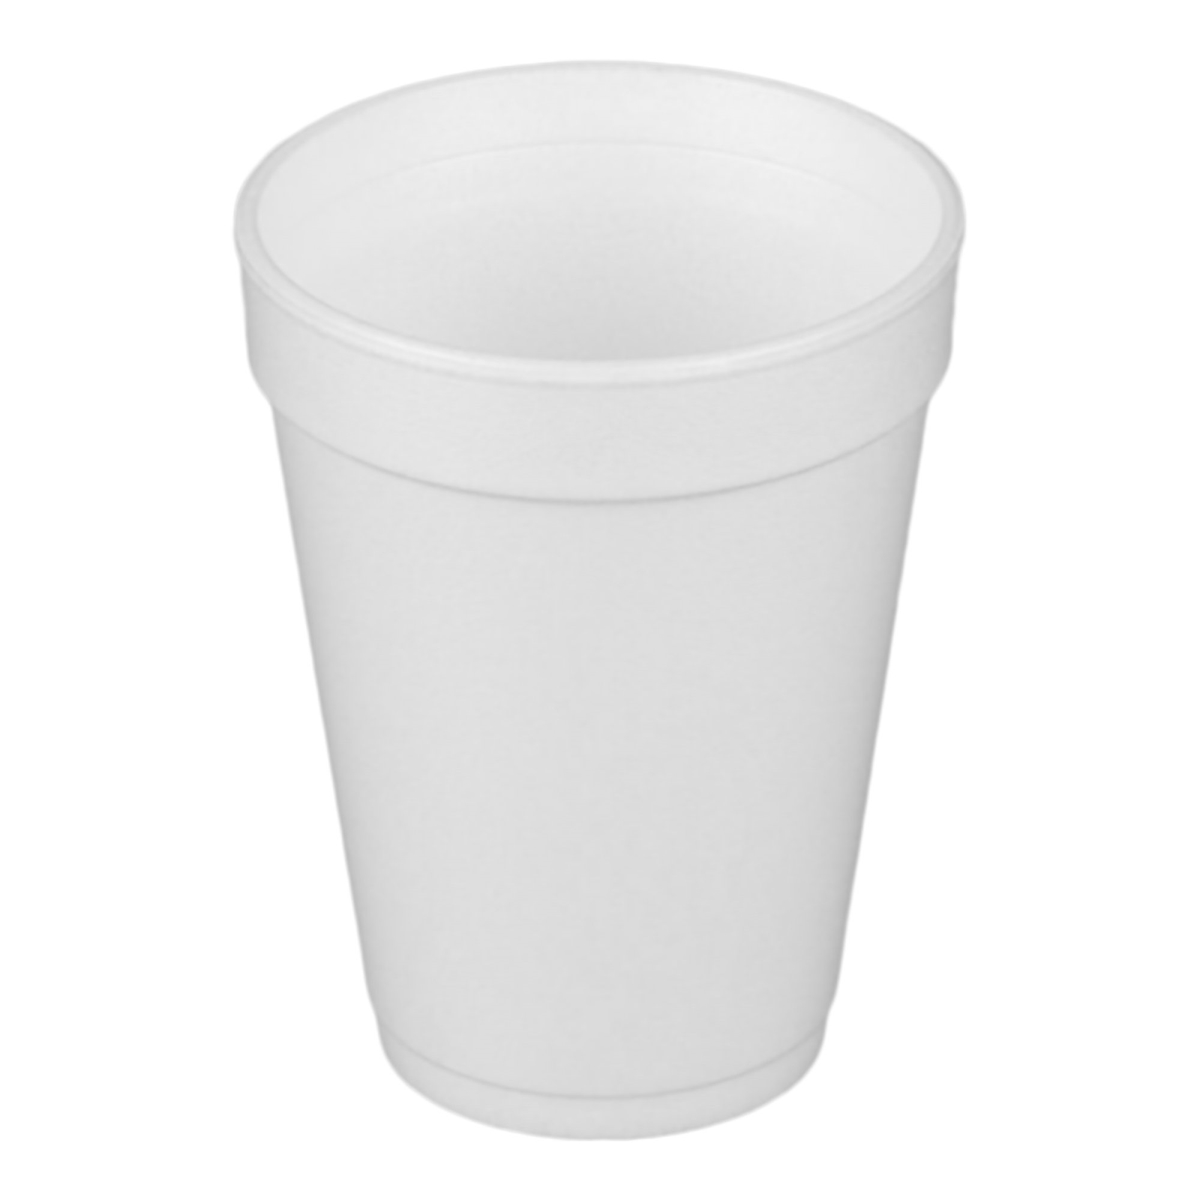 Picture of Dart 987449-SL 14 oz Styrofoam Disposable Drinking Cup, White - Pack of 25